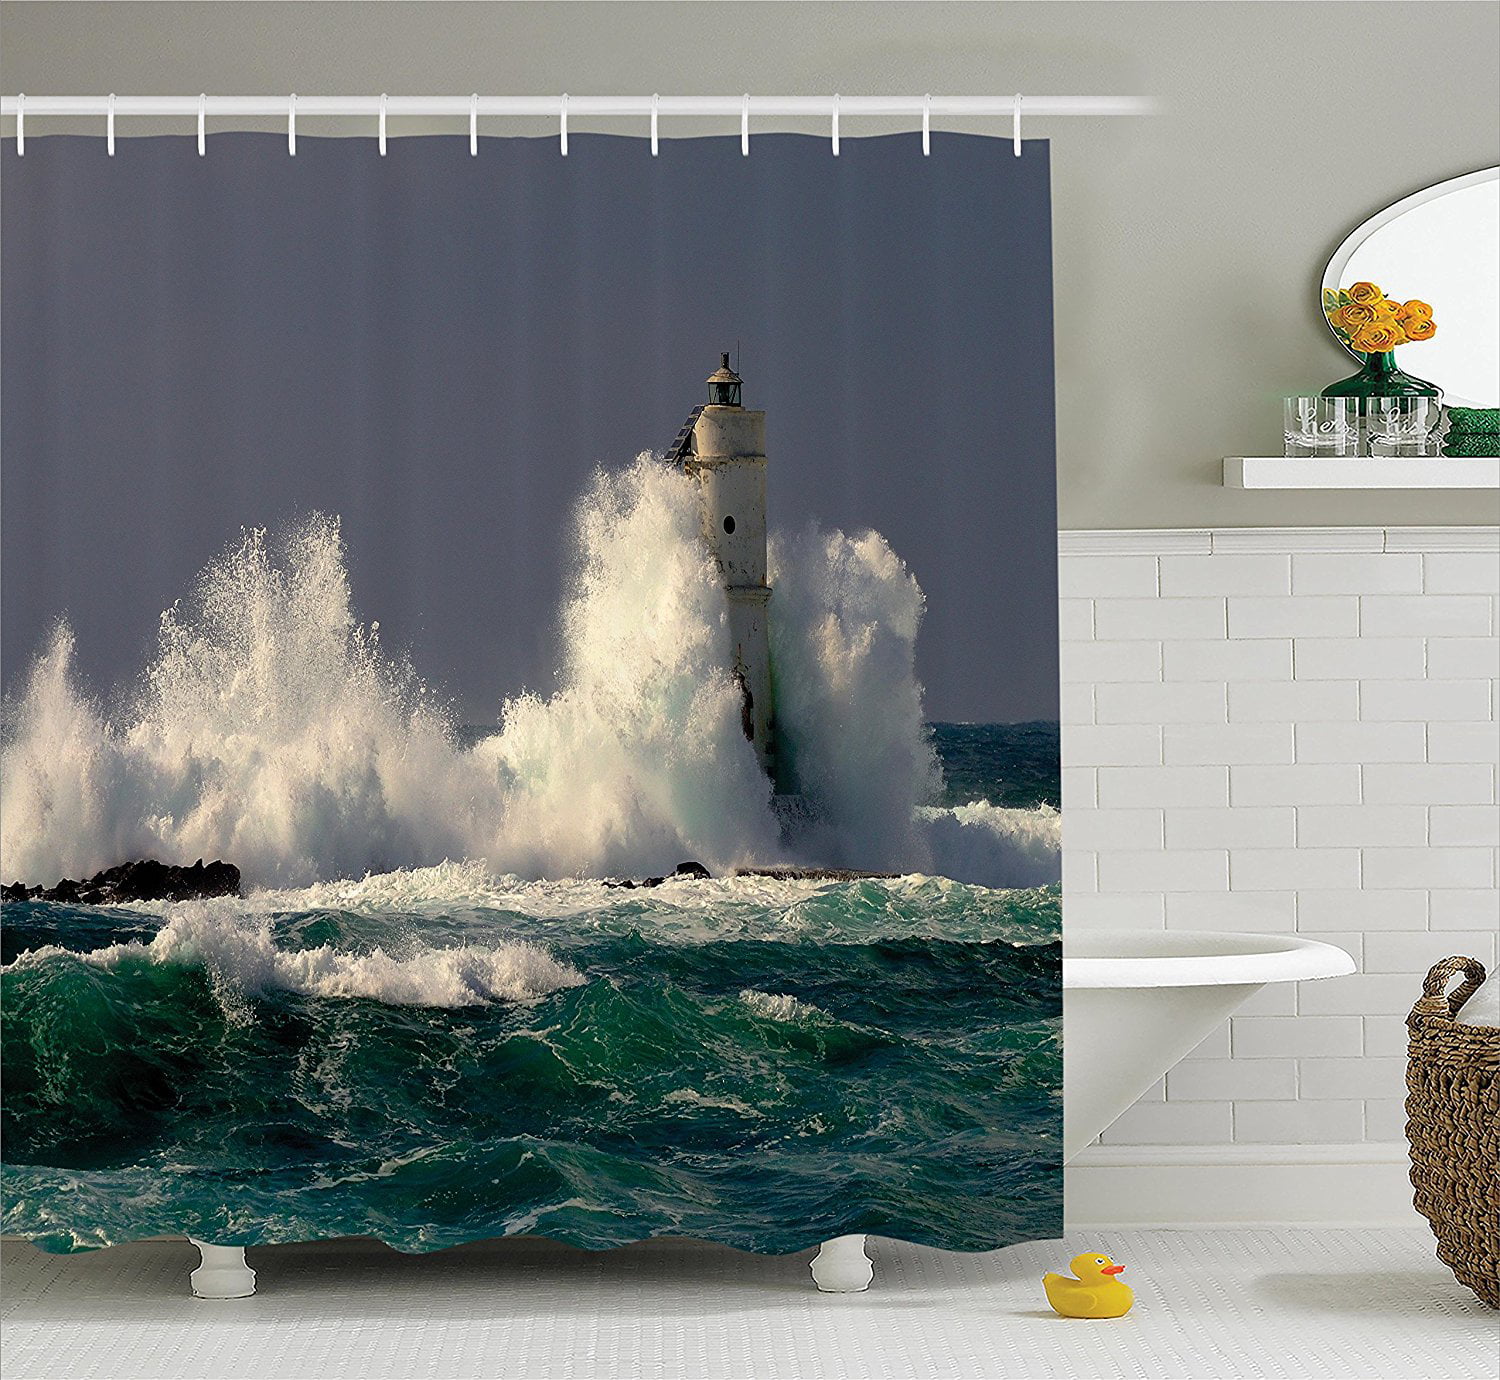 Details about   Tropical Shower Curtain Wooden House Nature Print for Bathroom 